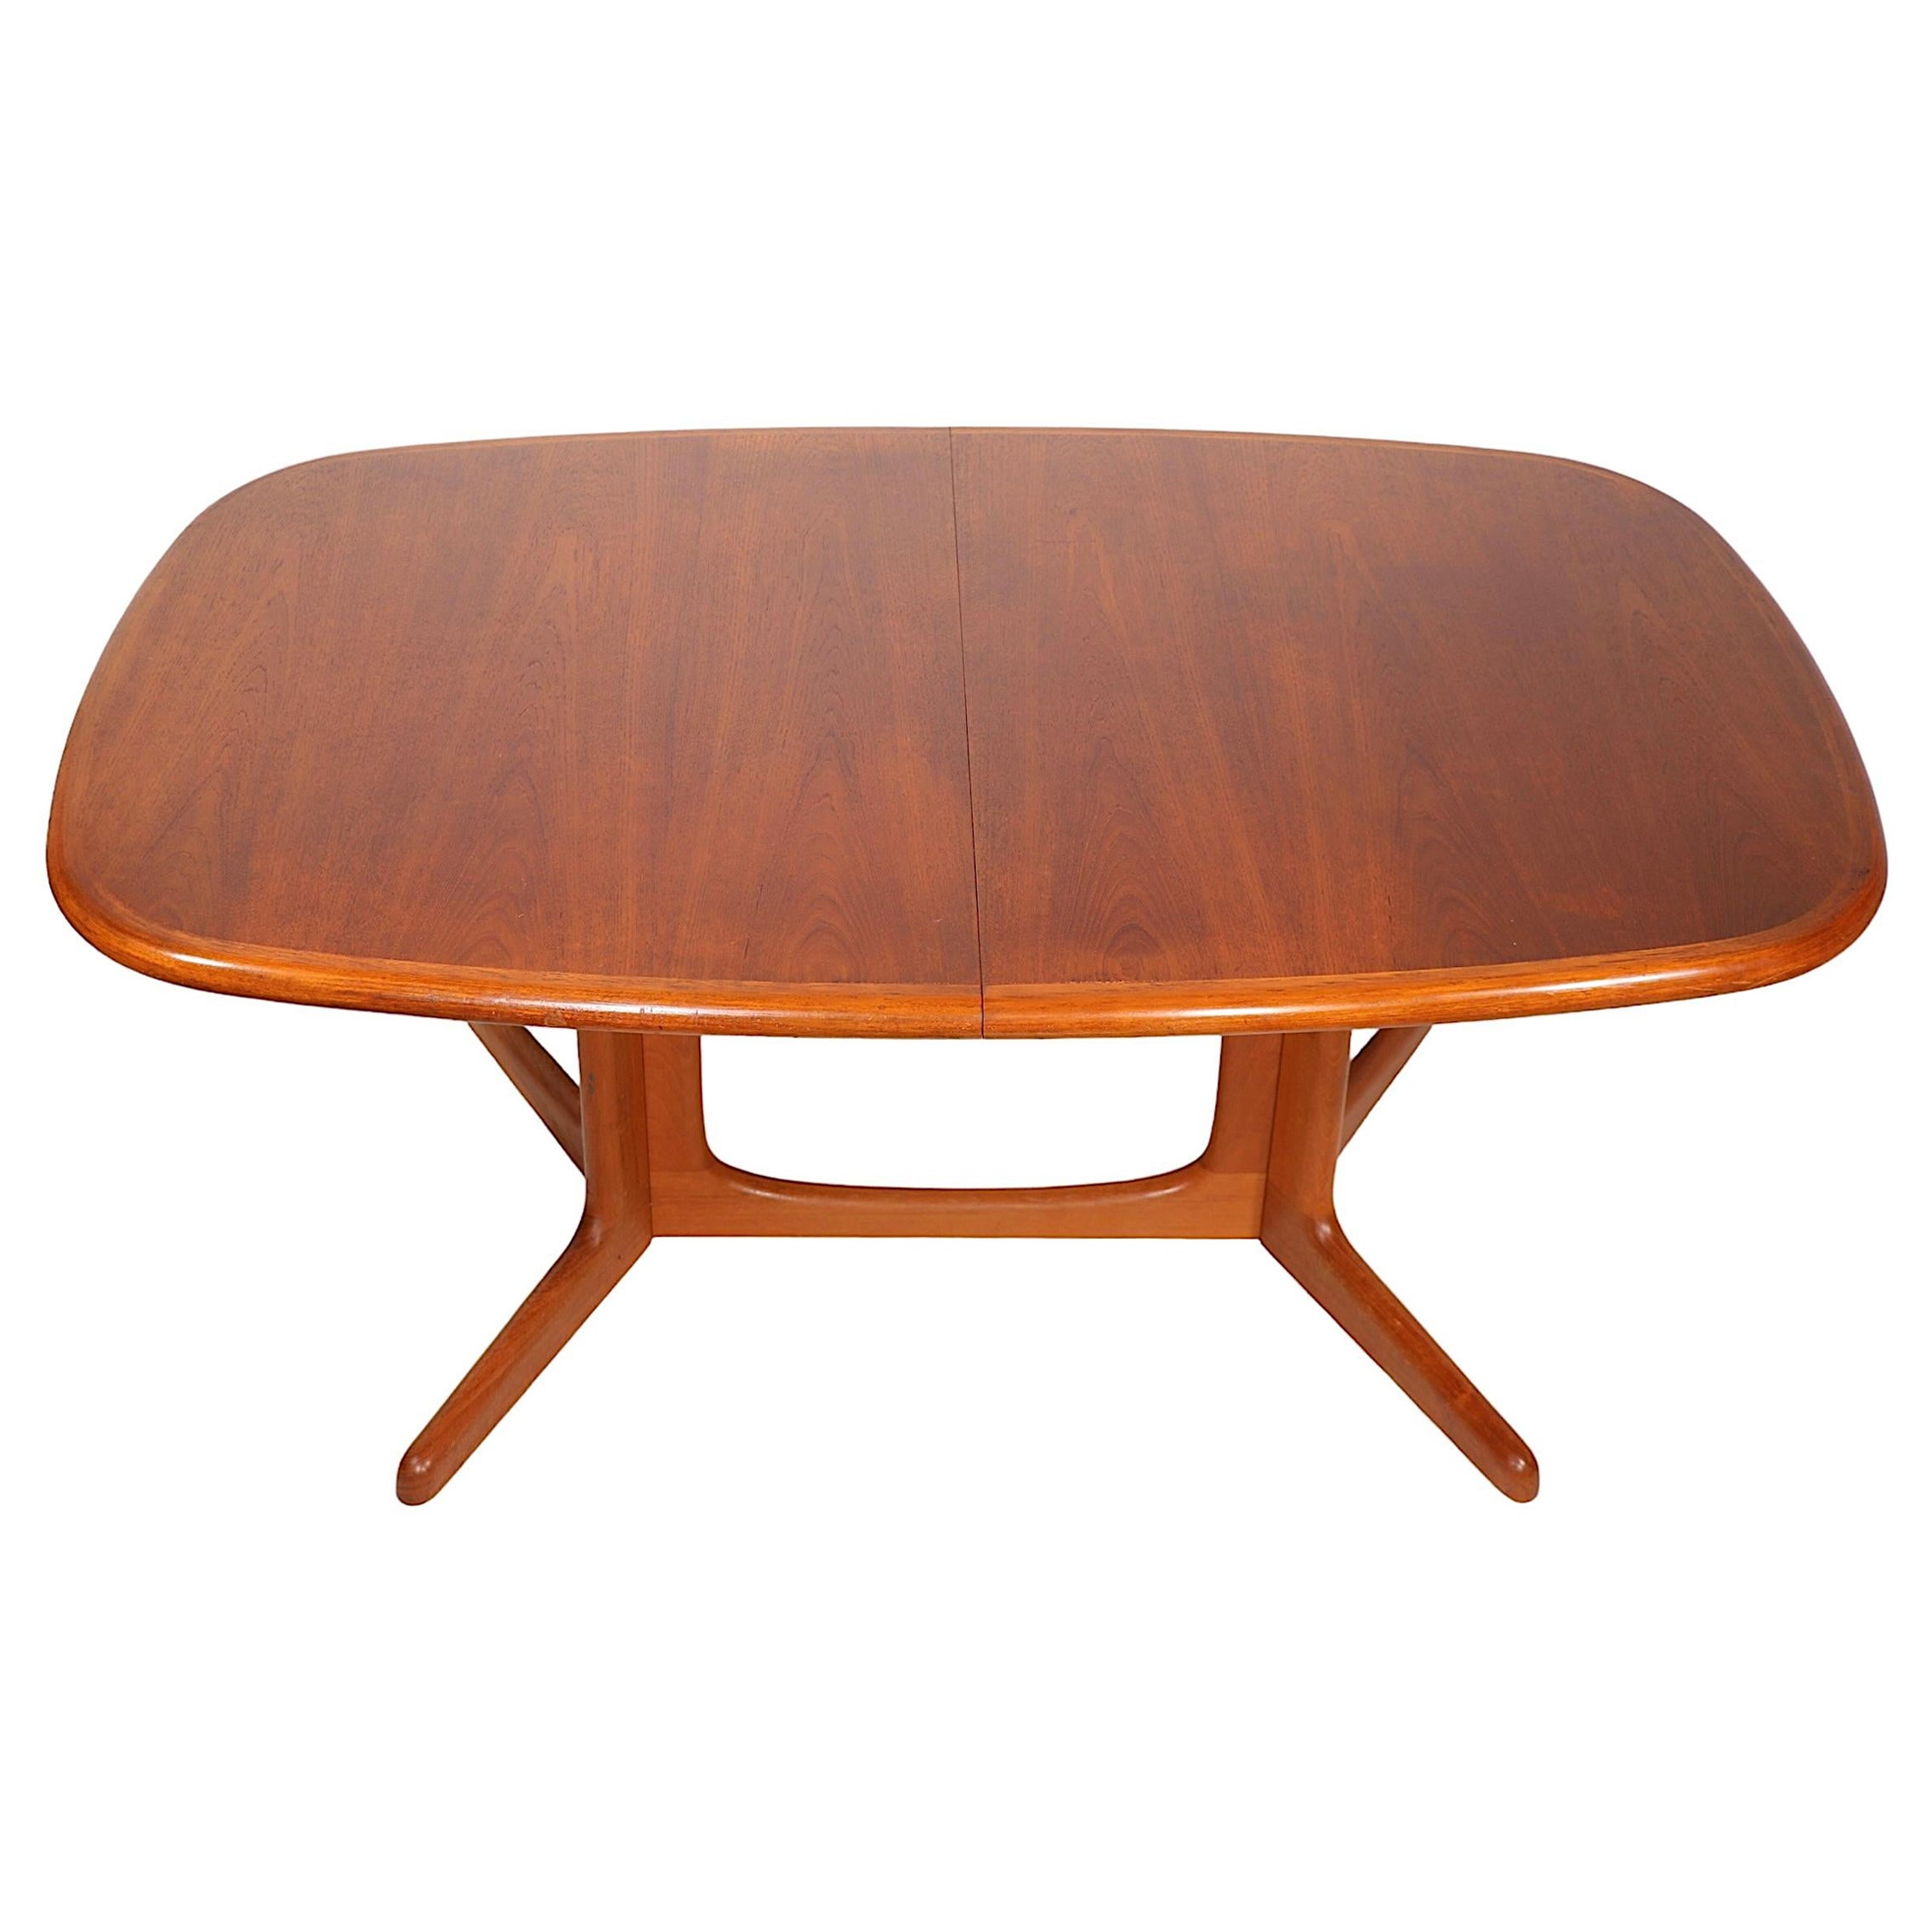 Danish Mid Century Oval Teak Dining Table by Niels Otto Moller for Gudme c 1970s For Sale